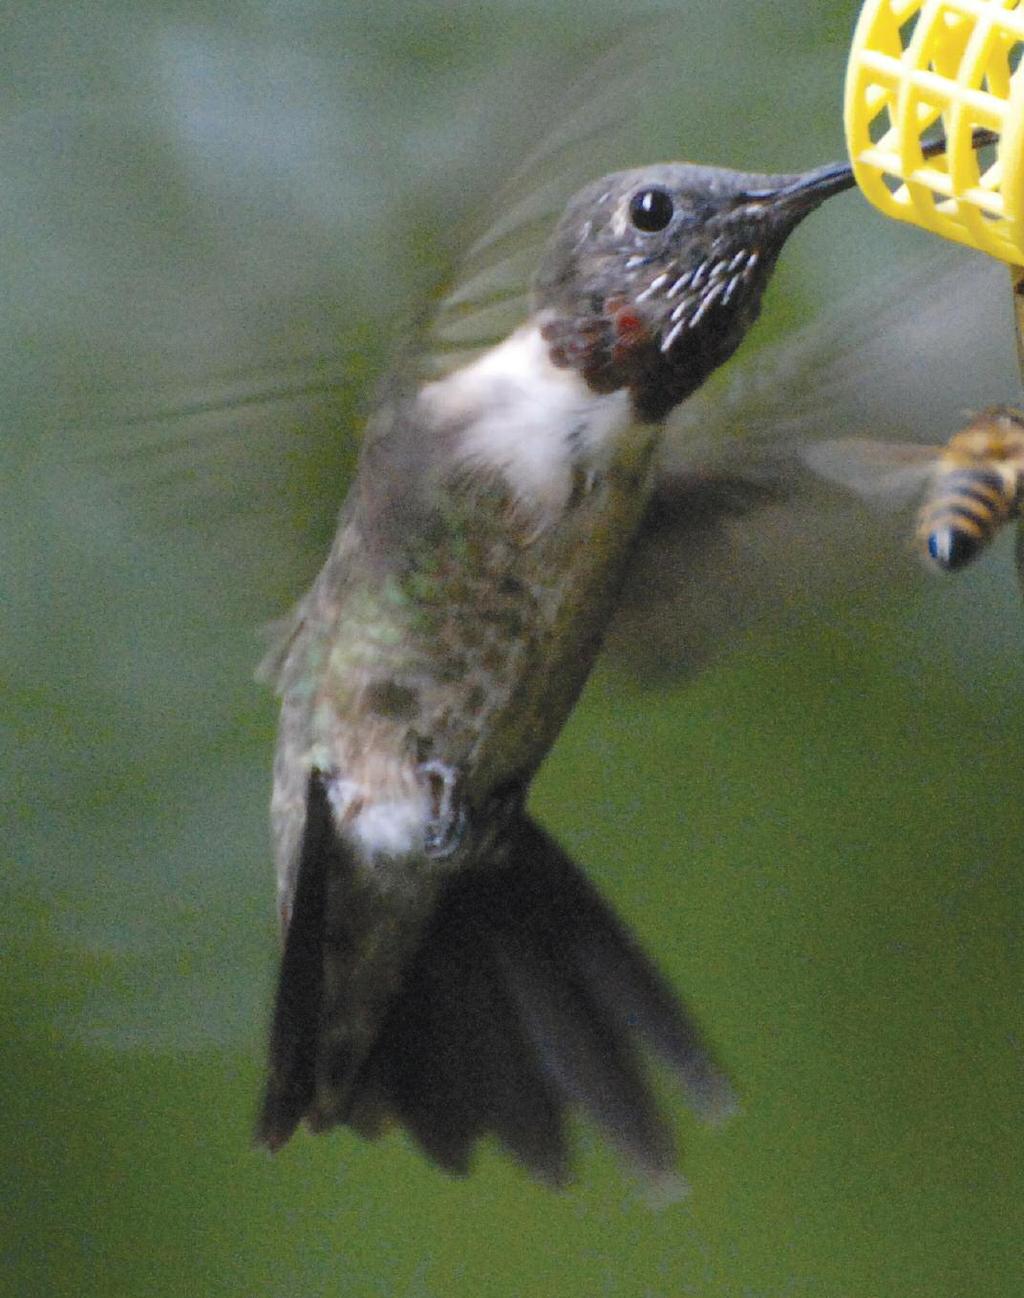 sional hummingbird missing feathers or even the entire tail. Fig. 13. This adult male, photographed 30 July 2007, shows active body molt. note the several sheathed gorget feathers.